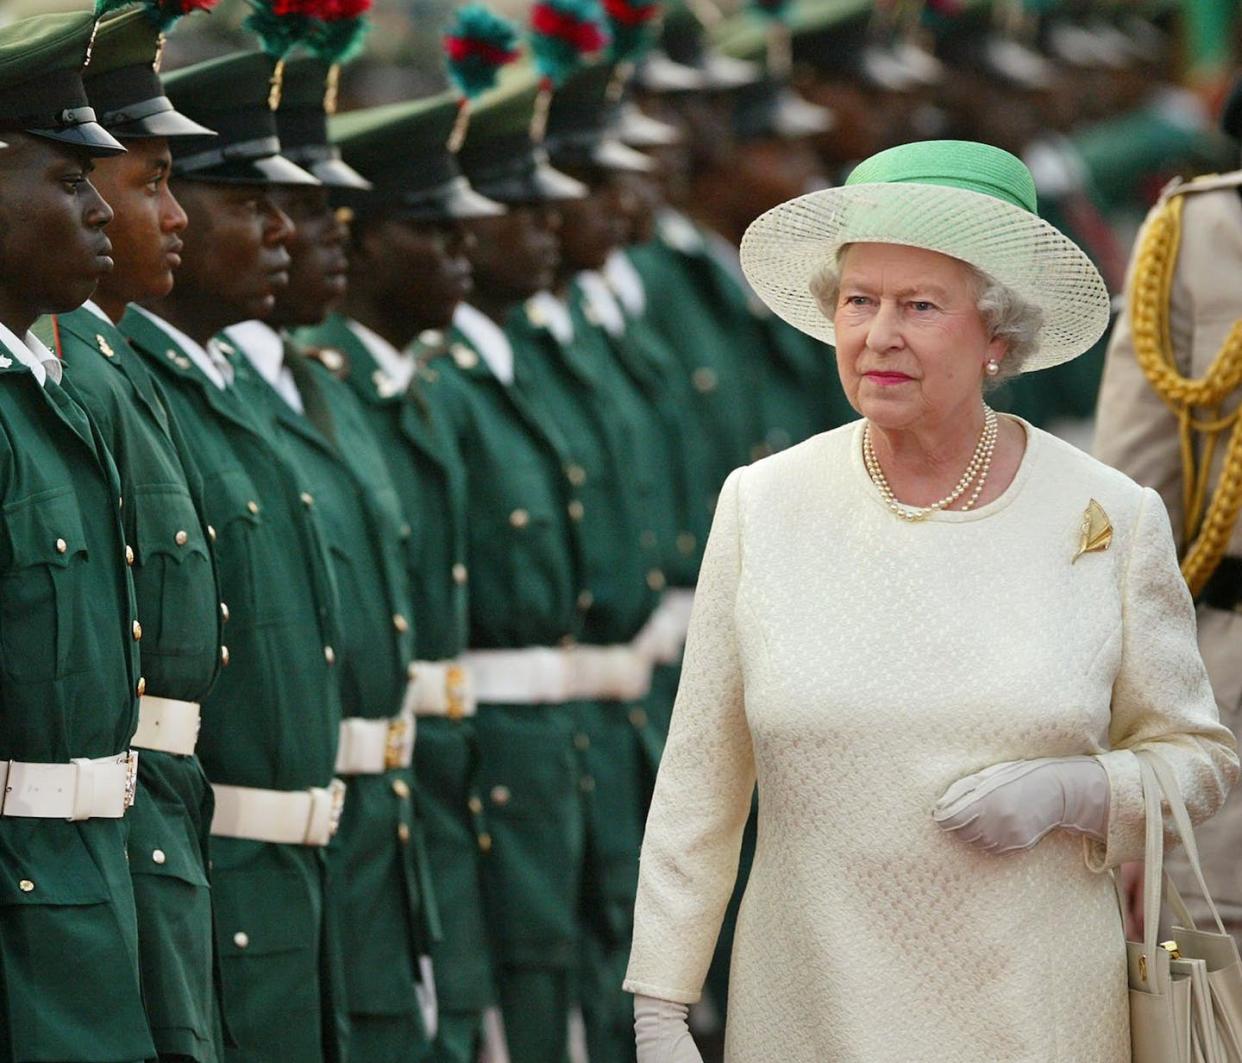 After the death of Queen Elizabeth, questions arise about whose life gets mourned and who does not. Here is the Queen with the Guards of Honour in Nigeria, Dec. 3, 2003, for the Commonwealth Heads of Government Meeting. (AP Photo/Ben Curtis)